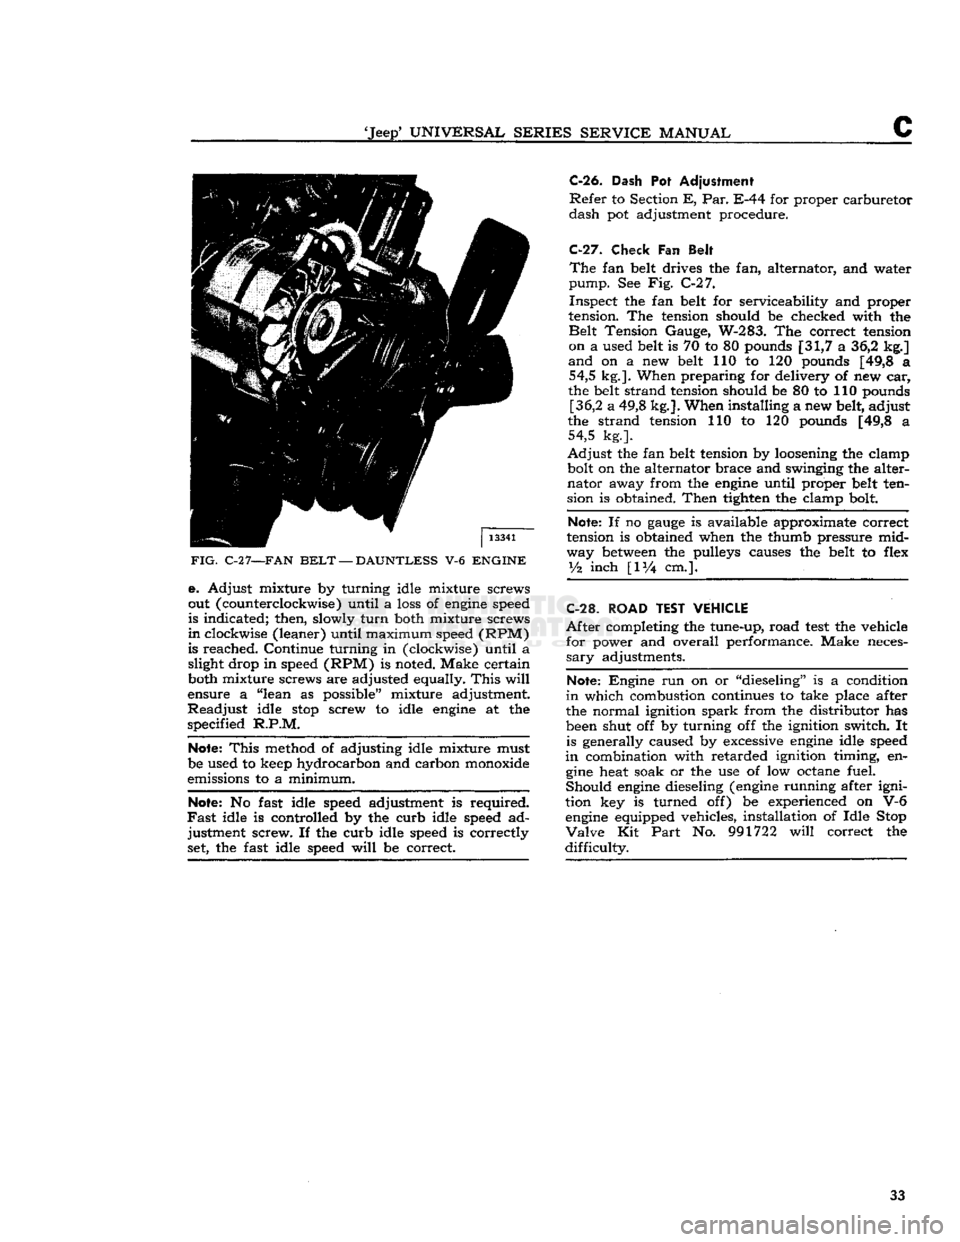 JEEP CJ 1953  Service Manual 
Jeep*
 UNIVERSAL
 SERIES
 SERVICE
 MANUAL 

C 

FIG.
 C-2
 7—FAN
 BELT
 —
 DAUNTLESS
 V-6
 ENGINE 
 e. Adjust mixture by turning idle mixture screws 
out (counterclockwise) until a loss of engin